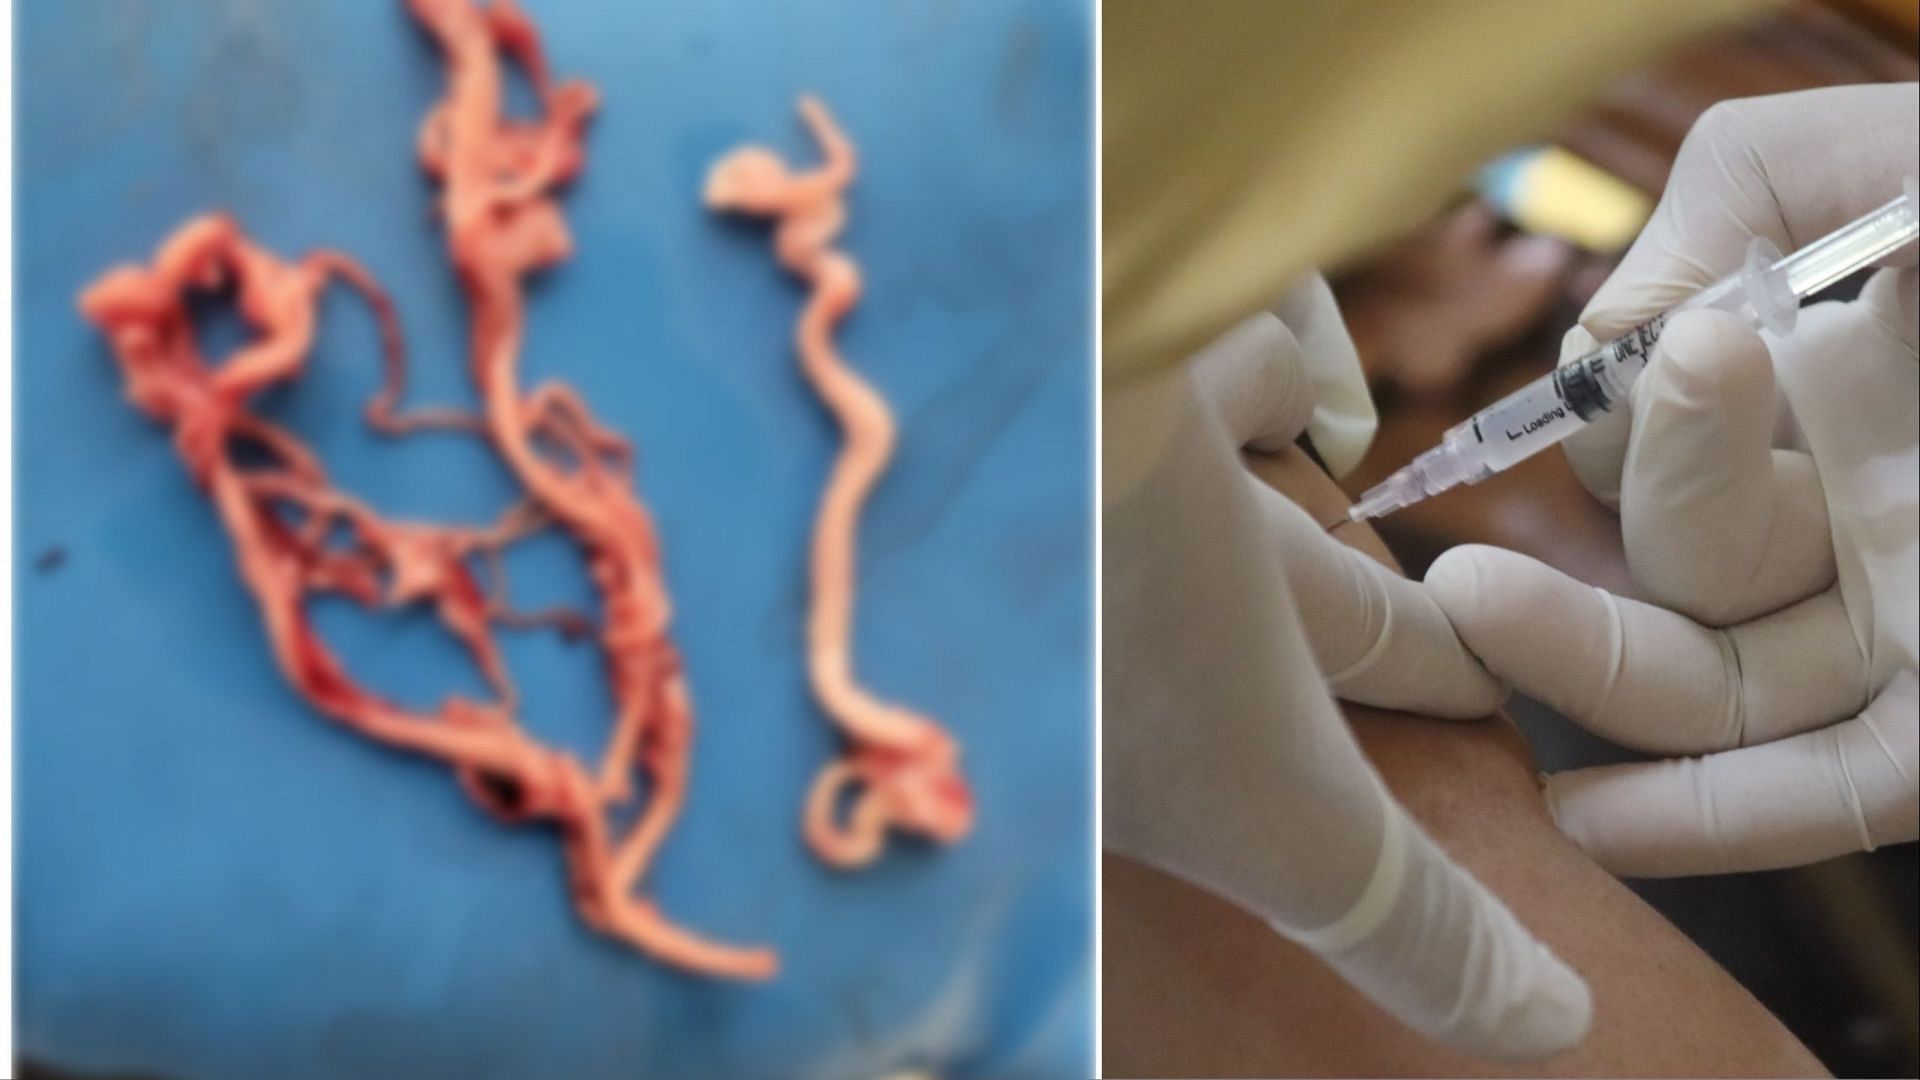 blood clots found in patients with COVID vaccines (Left Image via Twitter @RichardHirschman/ Right Image Unsplash Mufid )